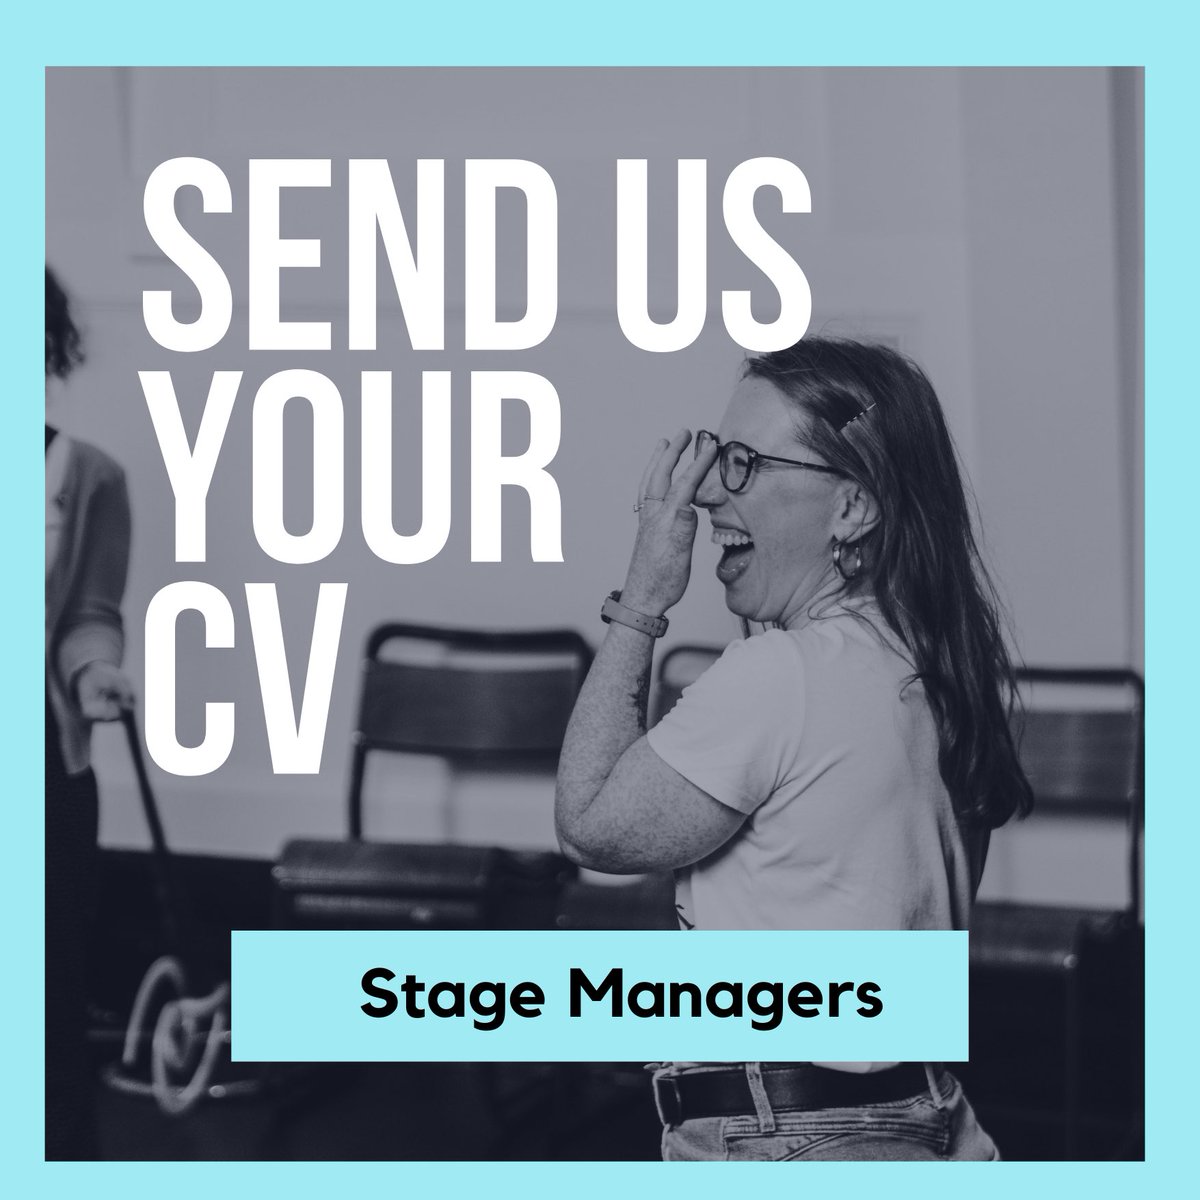 Are you an experienced Stage manager: - Liverpool (or Merseyside) based - an interest in immersive theatre - availability May - July? Send us your CV info@paperworktheatre.co.uk We’d love to get to know you! #freelancejobs #artsjobs #liverpooltheatre #immersivetheatre